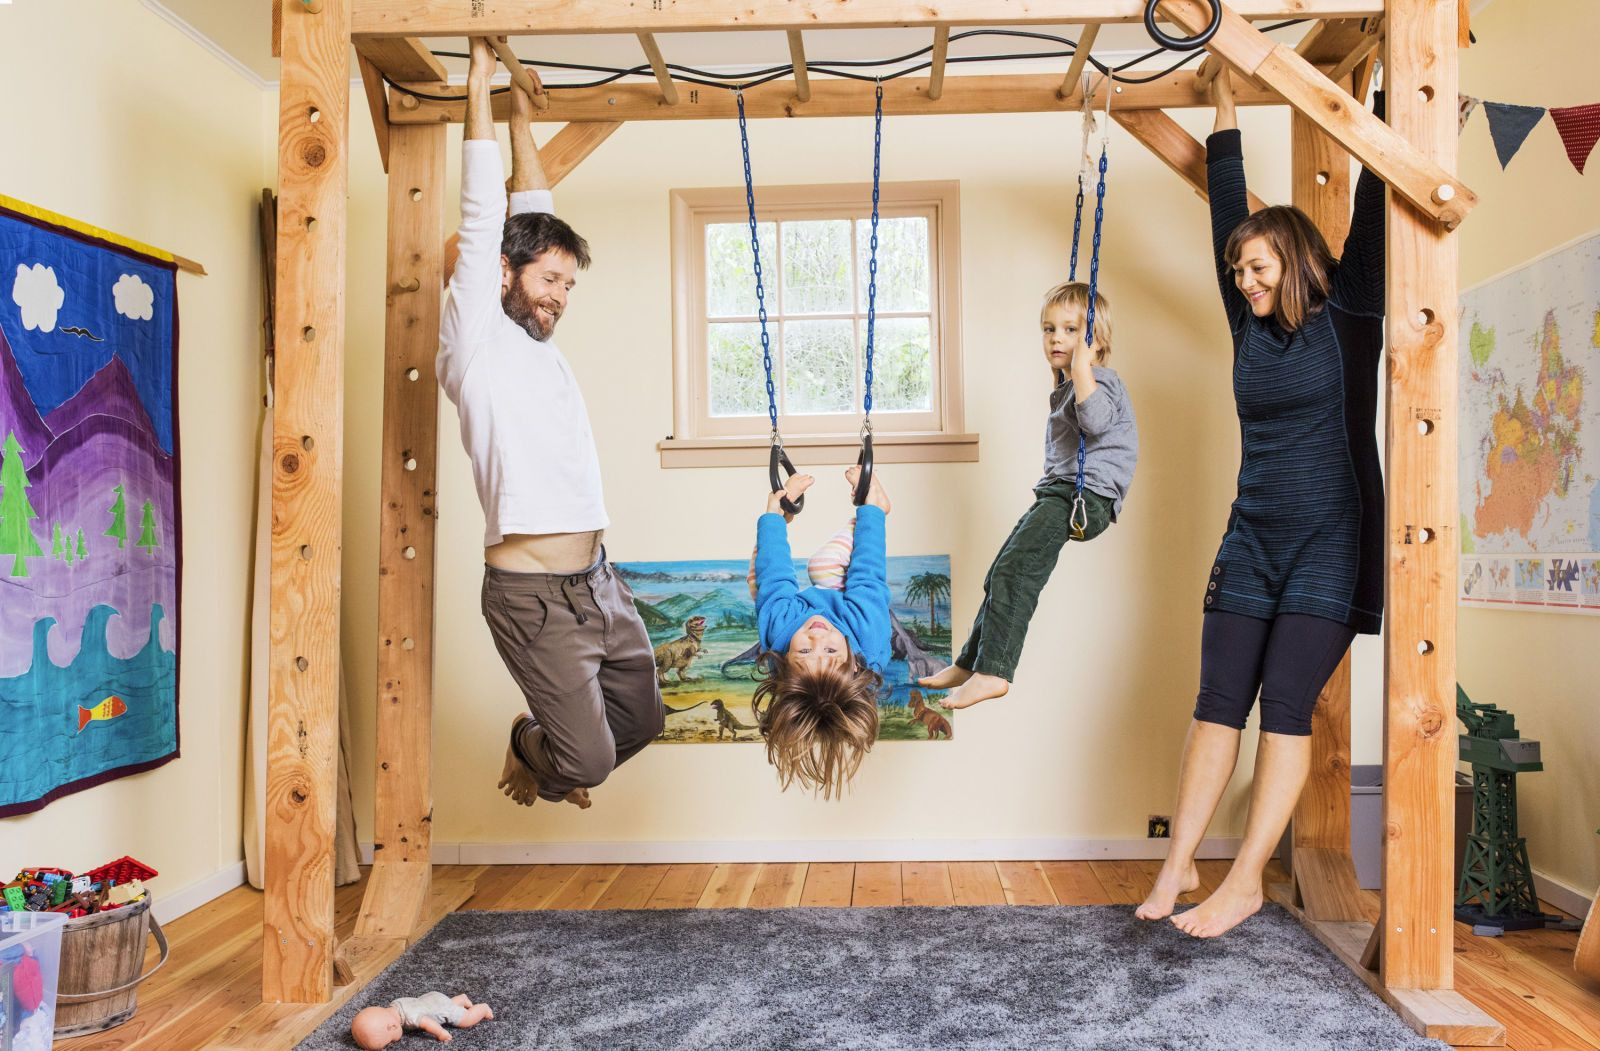 Indoor Monkey Bars Kids
 This Family Traded Mattresses for Monkey Bars